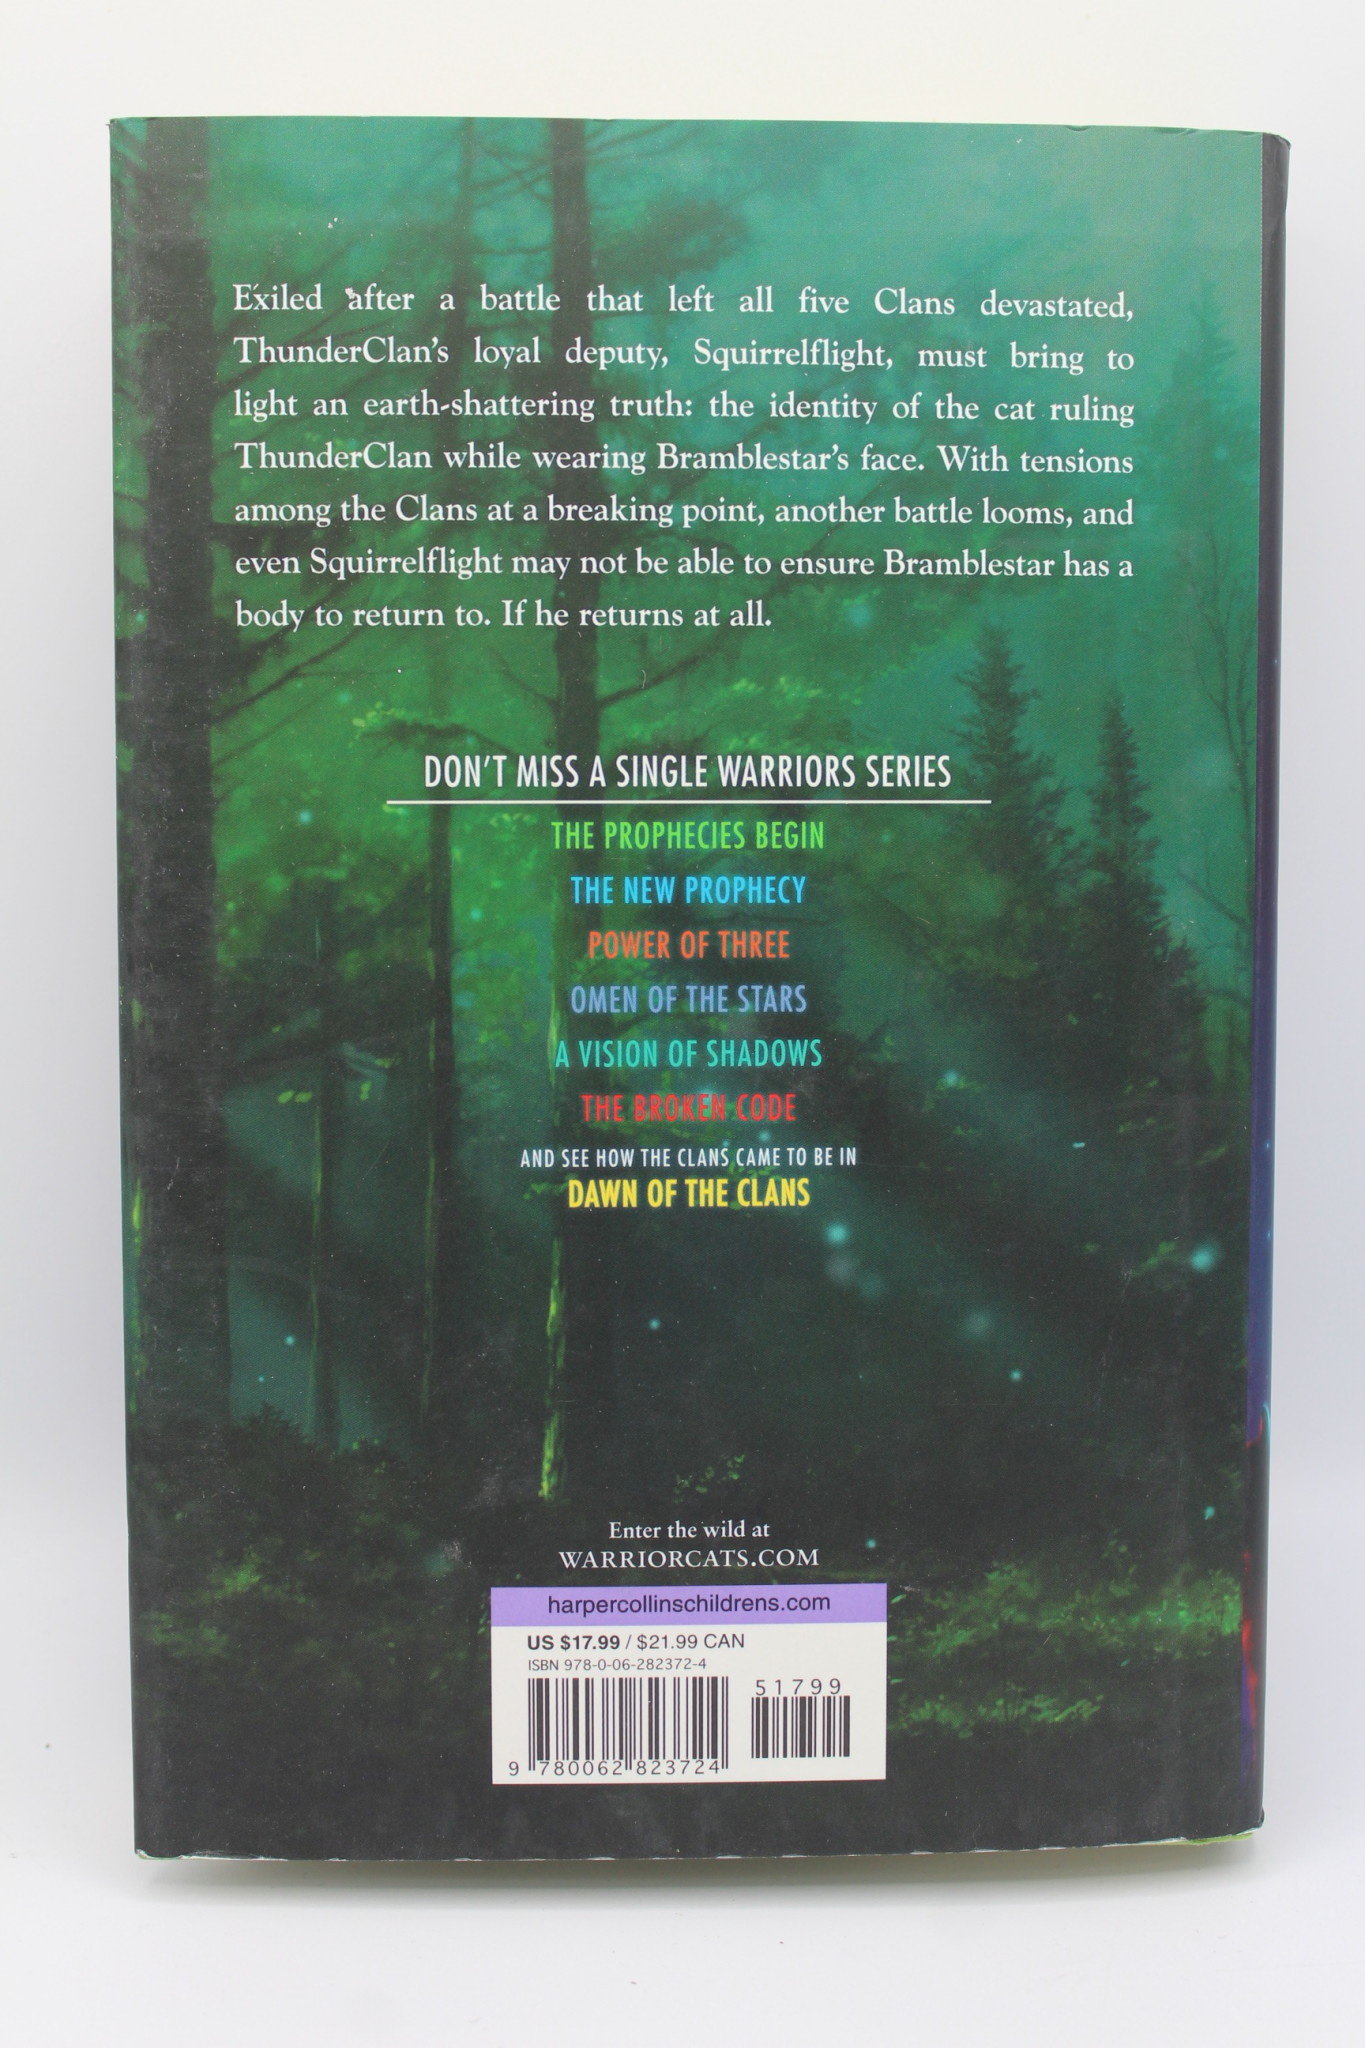 Warriors: Code of the Clans by Erin Hunter, Hardcover